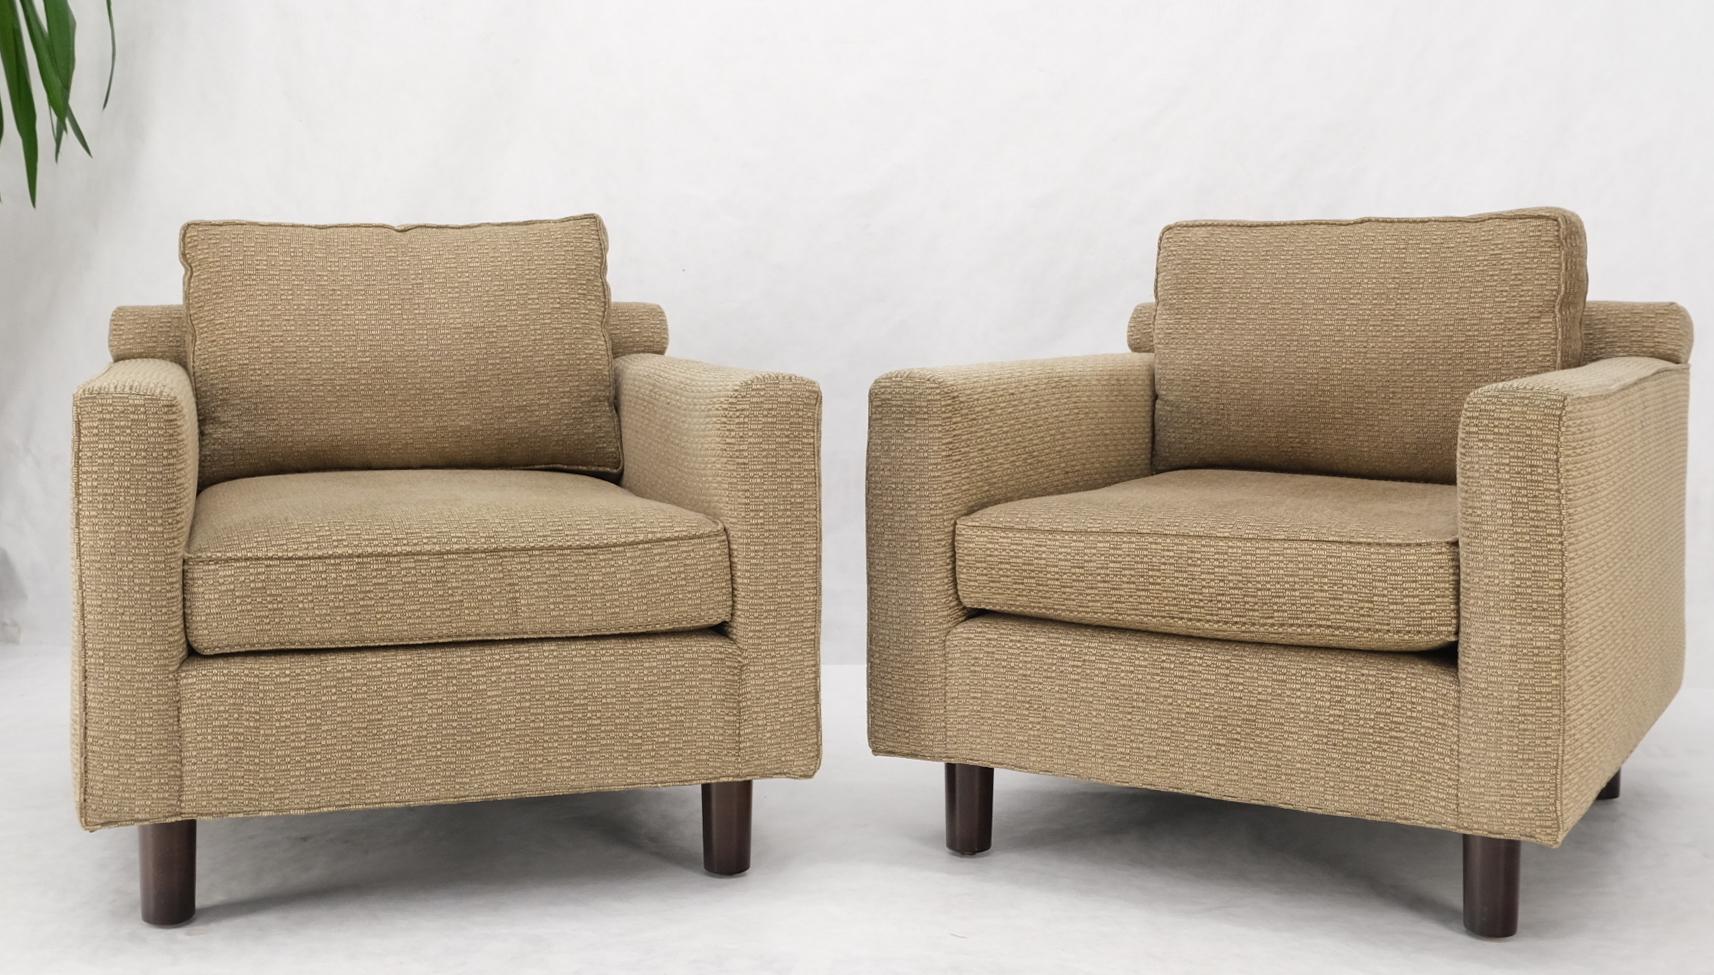 Pair Deep Seat Oatmeal Fabric Upholstery Contemporary Lounge Chair on Dowel Legs For Sale 1